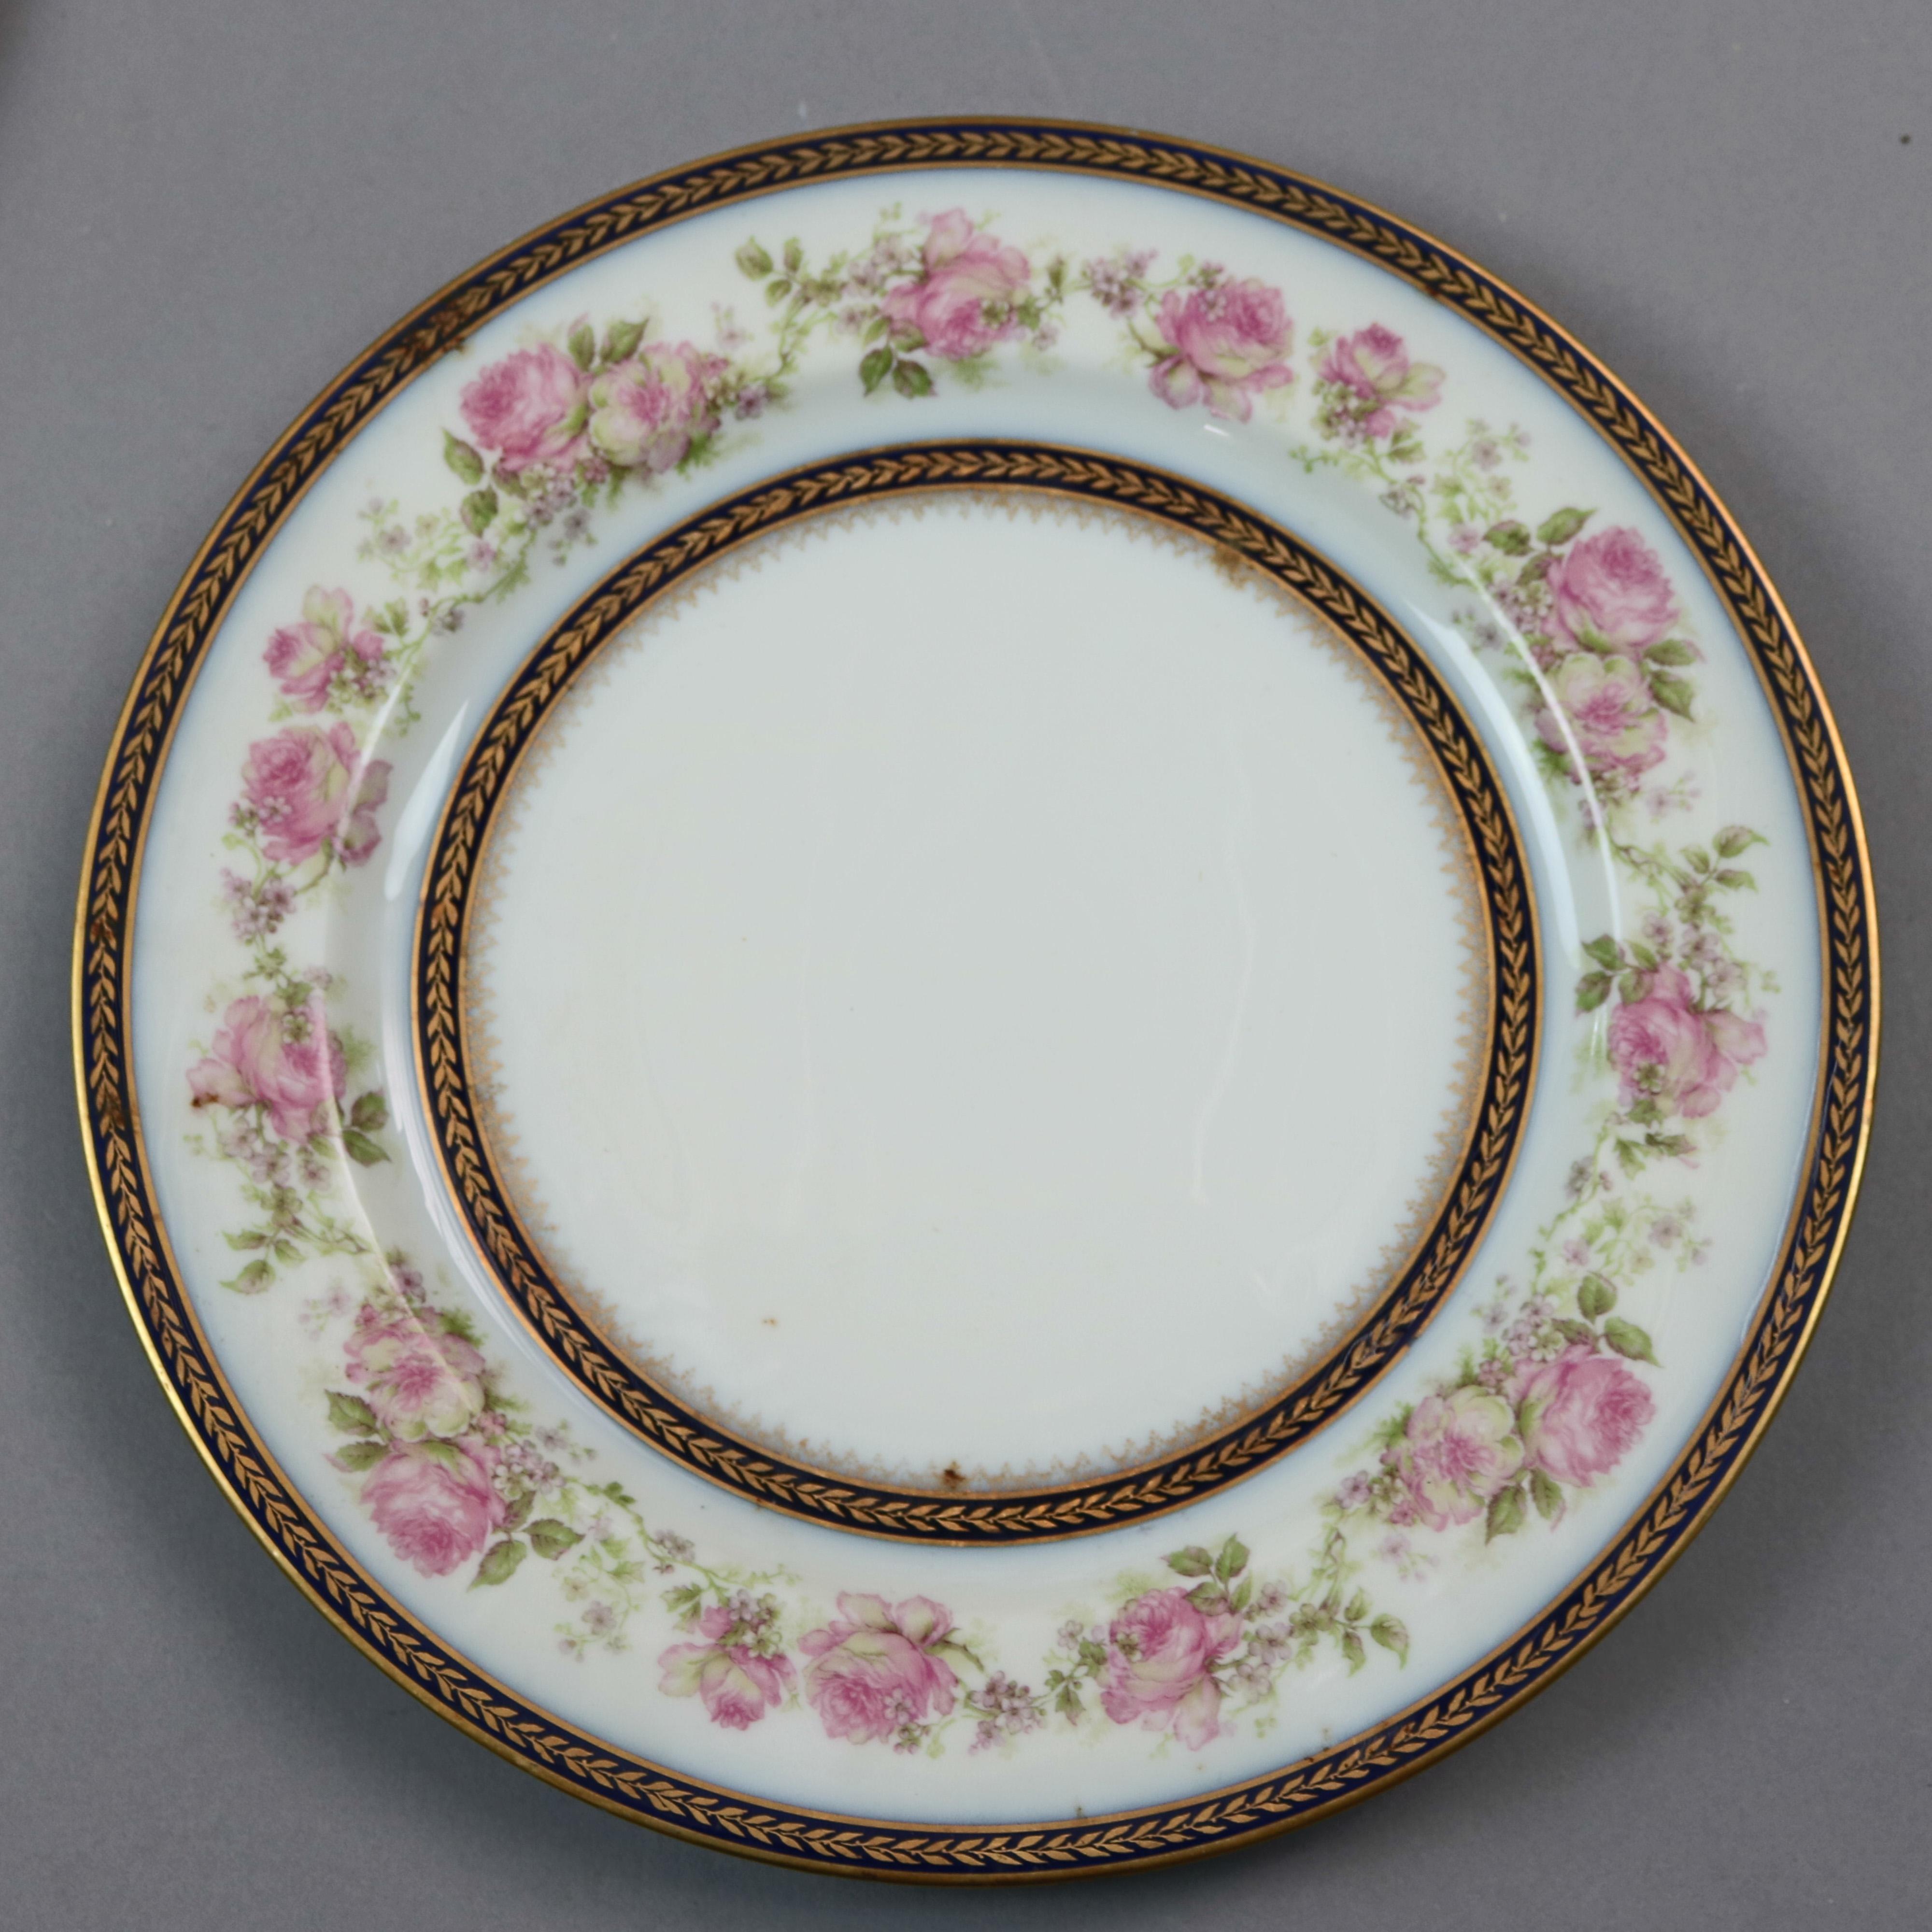 A set of ten French Haviland Limoges porcelain dinner plates offer floral rim with gilt highlights, en verso maker mark as photographed, 20th century.

***DELIVERY NOTICE – Due to COVID-19 we are employing NO-CONTACT PRACTICES in the transfer of